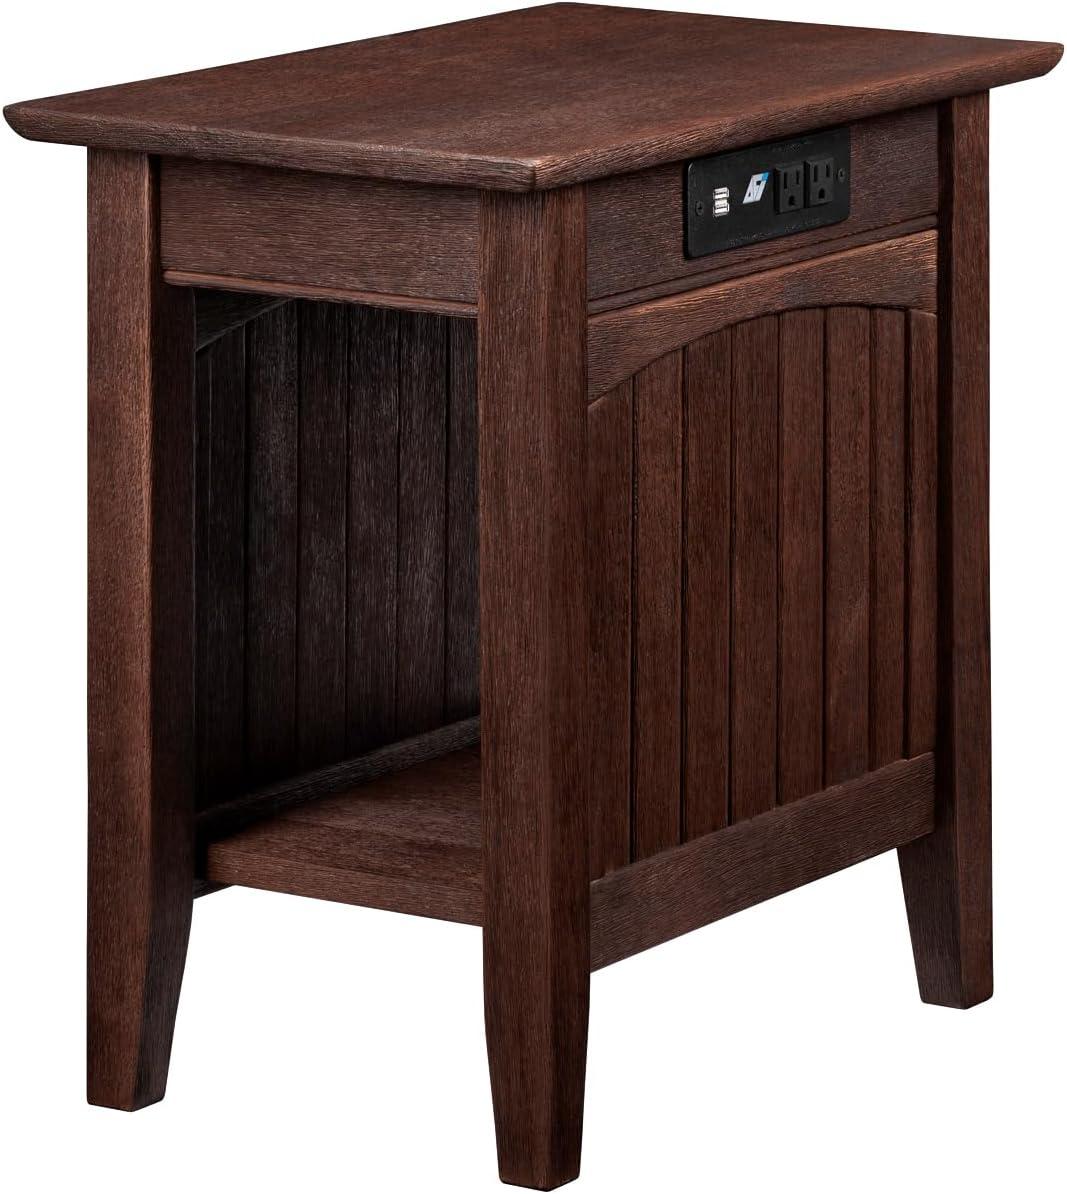 Nantucket Burnt Amber Solid Rubberwood Side Table with Charging Station